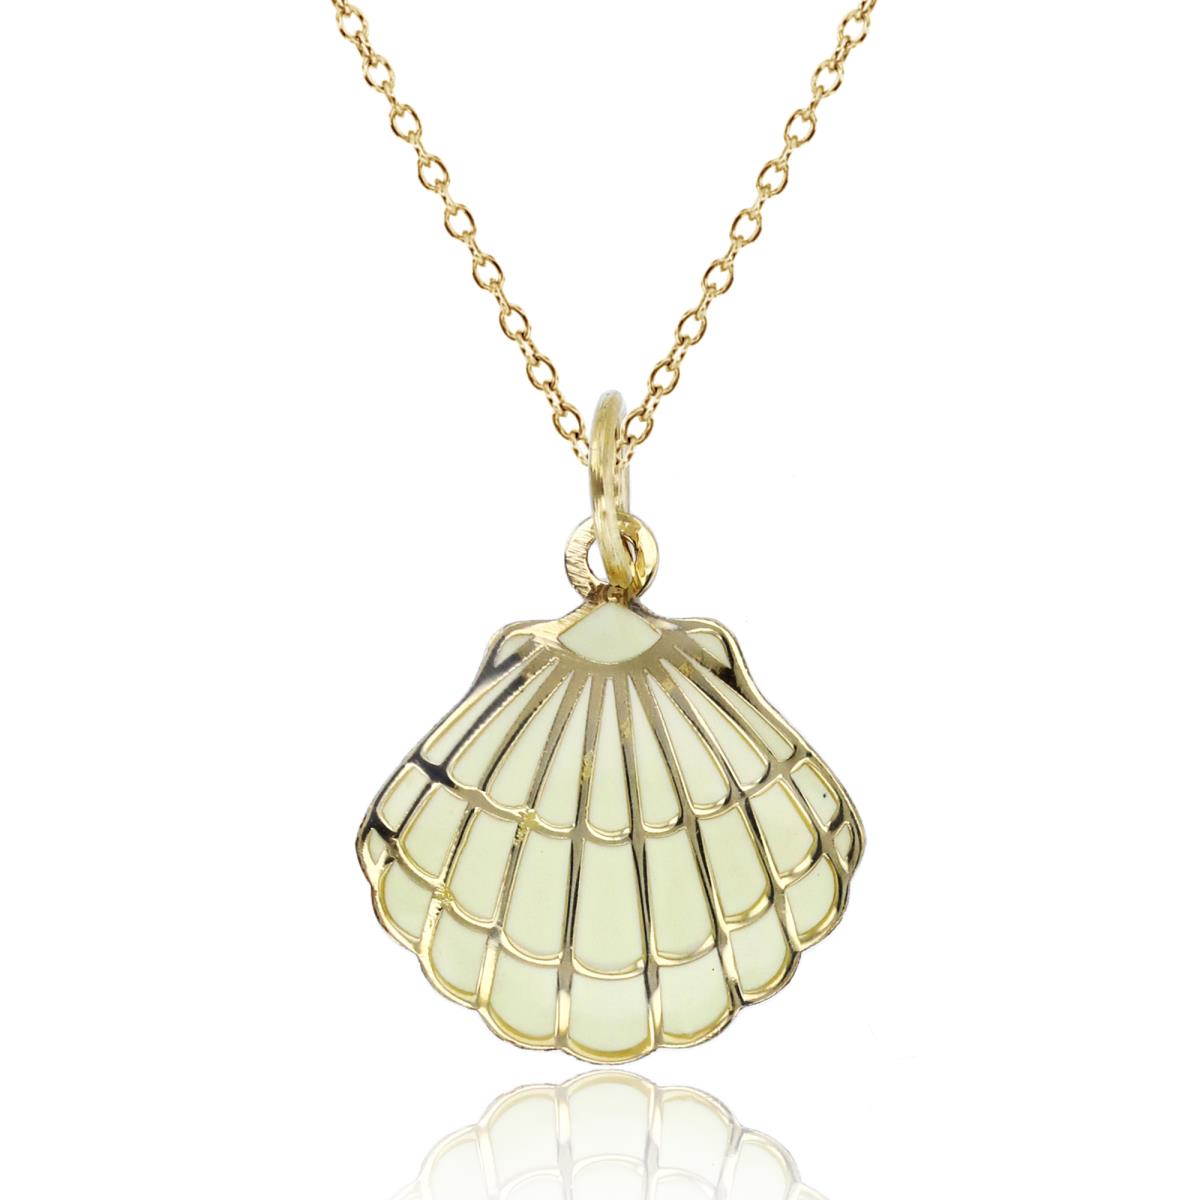 14K Yellow Gold Enamel 20x15mm Shell 18"Necklace